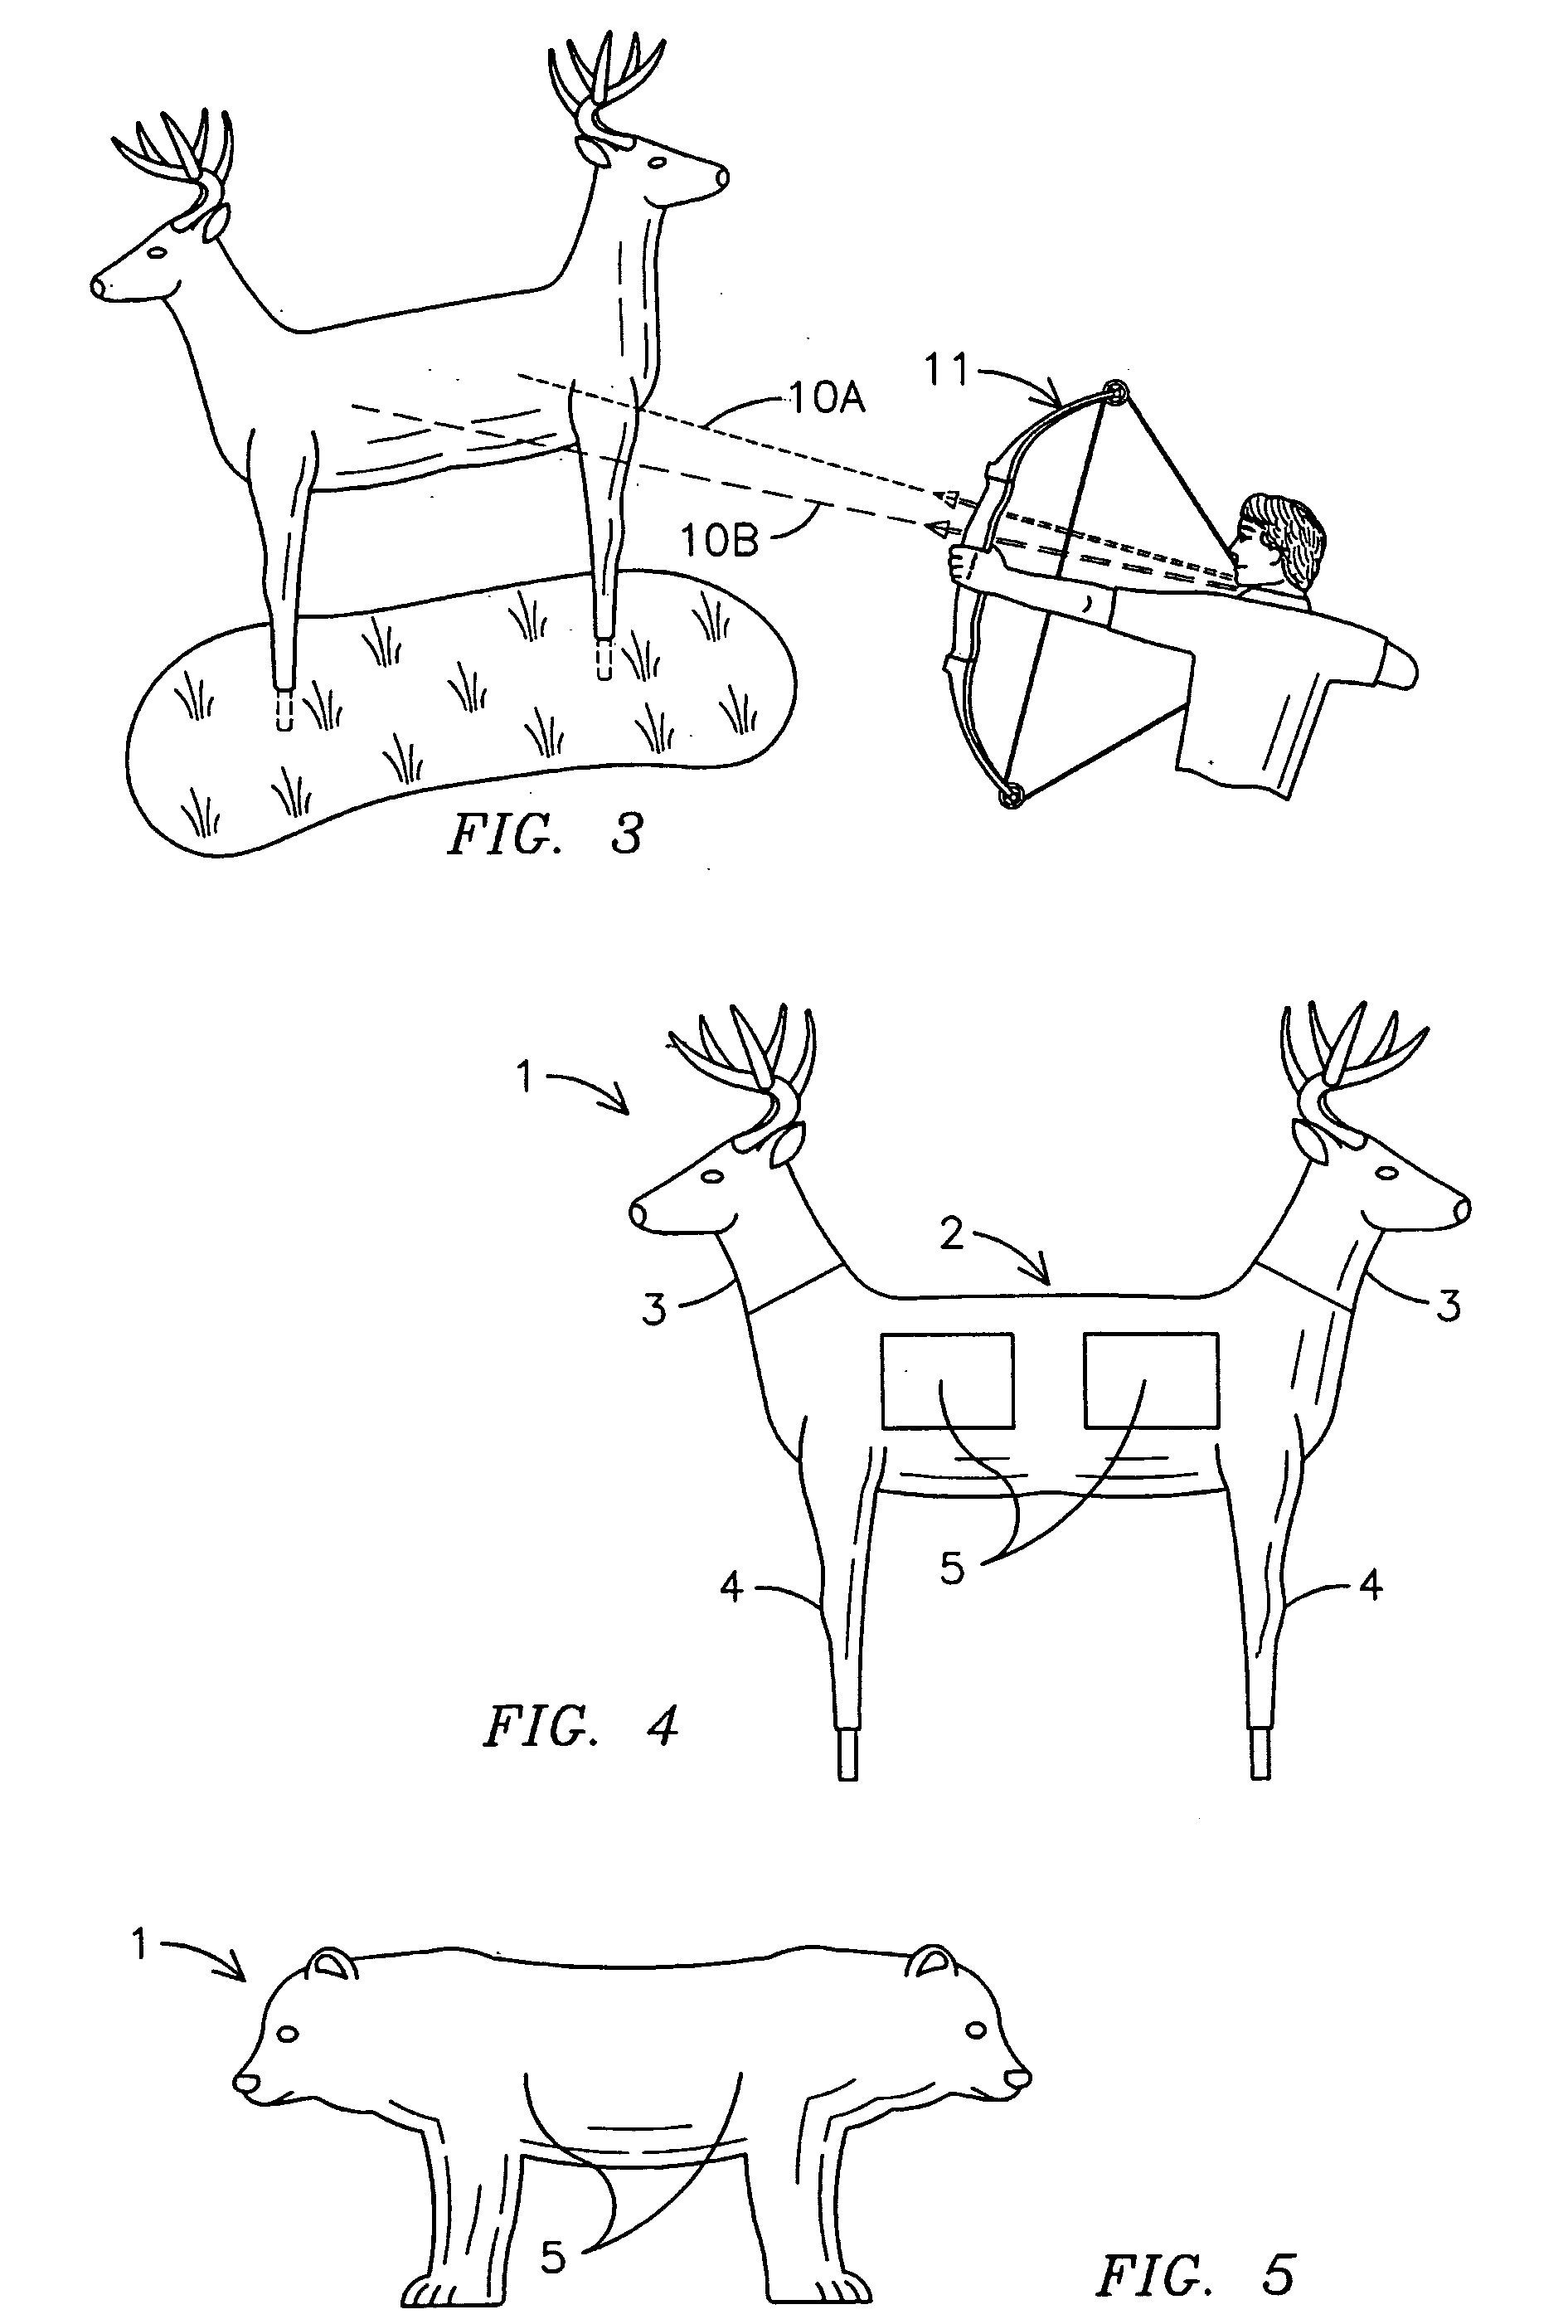 Three-dimensional archery target with multiple vital target areas